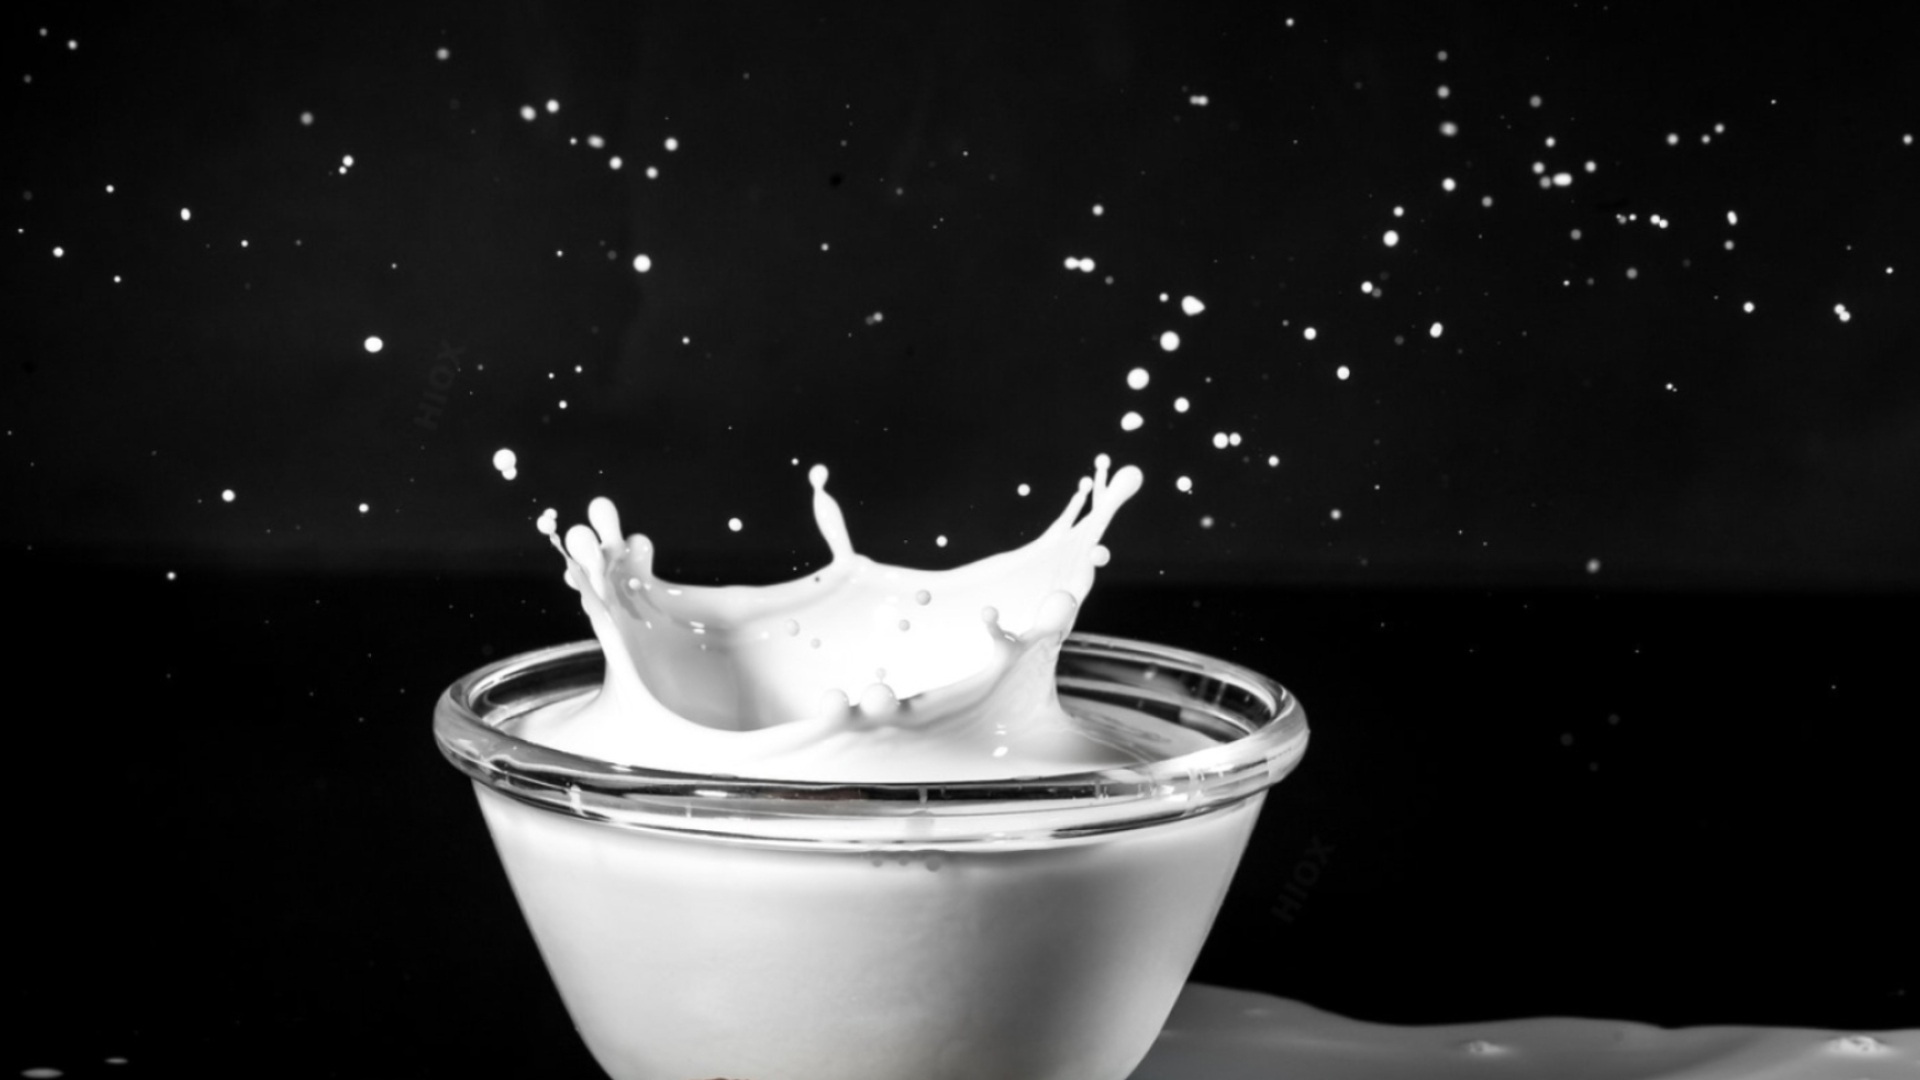 Milk: A primary ingredient in traditional desserts like rice pudding or custard. 1920x1080 Full HD Background.